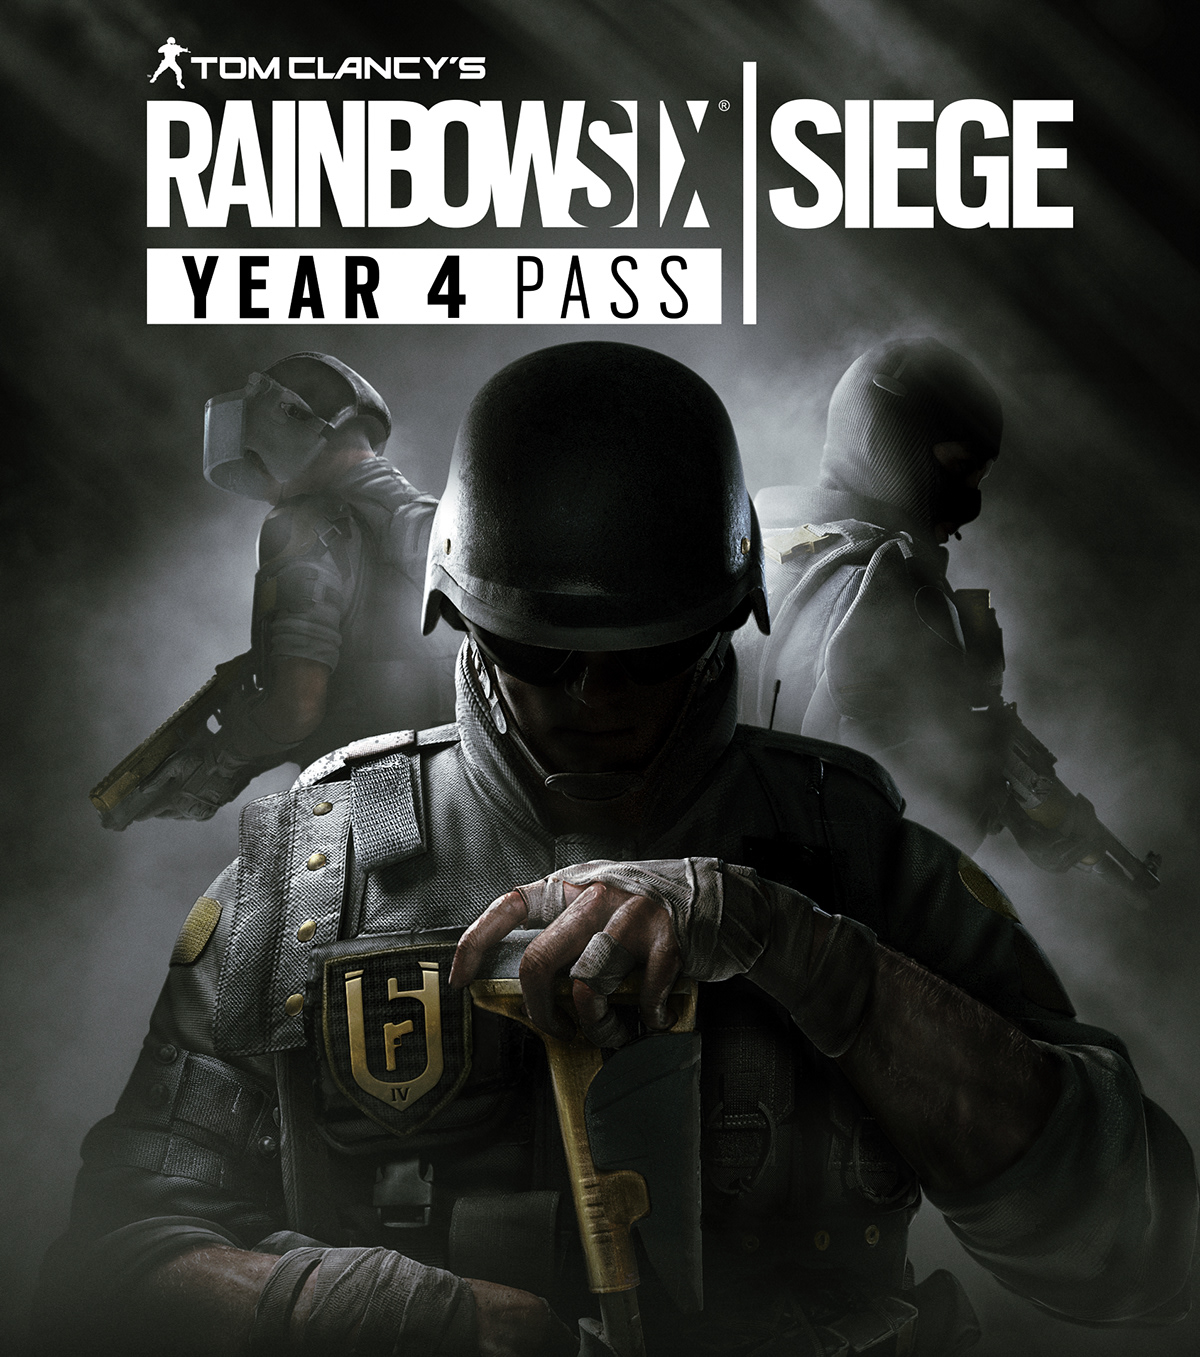 Rainbow Six Siege Season Pass cover video game Operators tactical Shooter Counter-Terrorism  mysterious